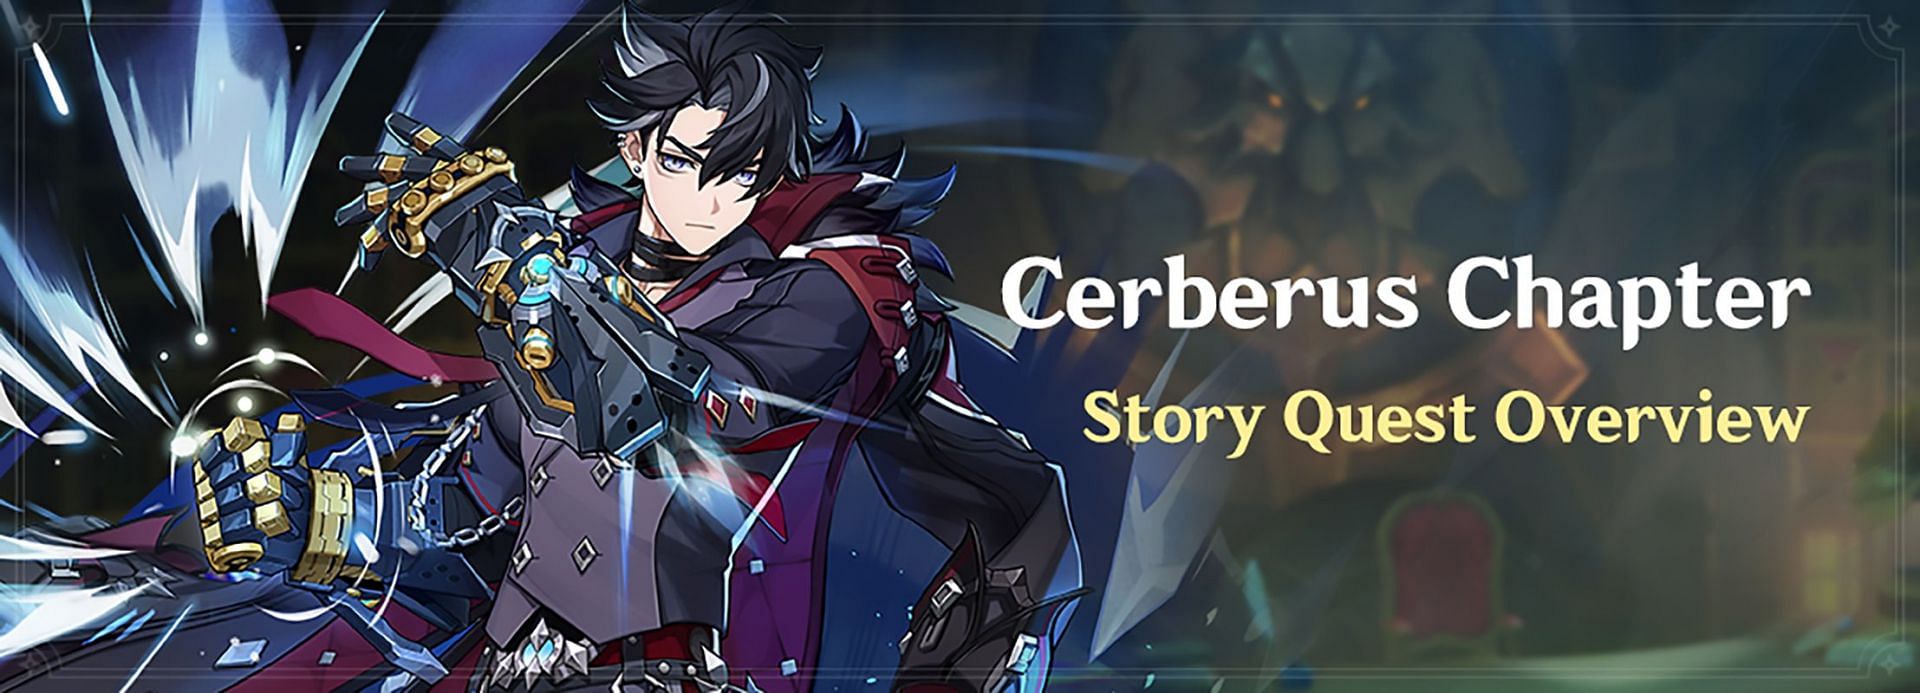 Wriothesley Story Quest - Cerberus Chapter (Image via HoYoverse)